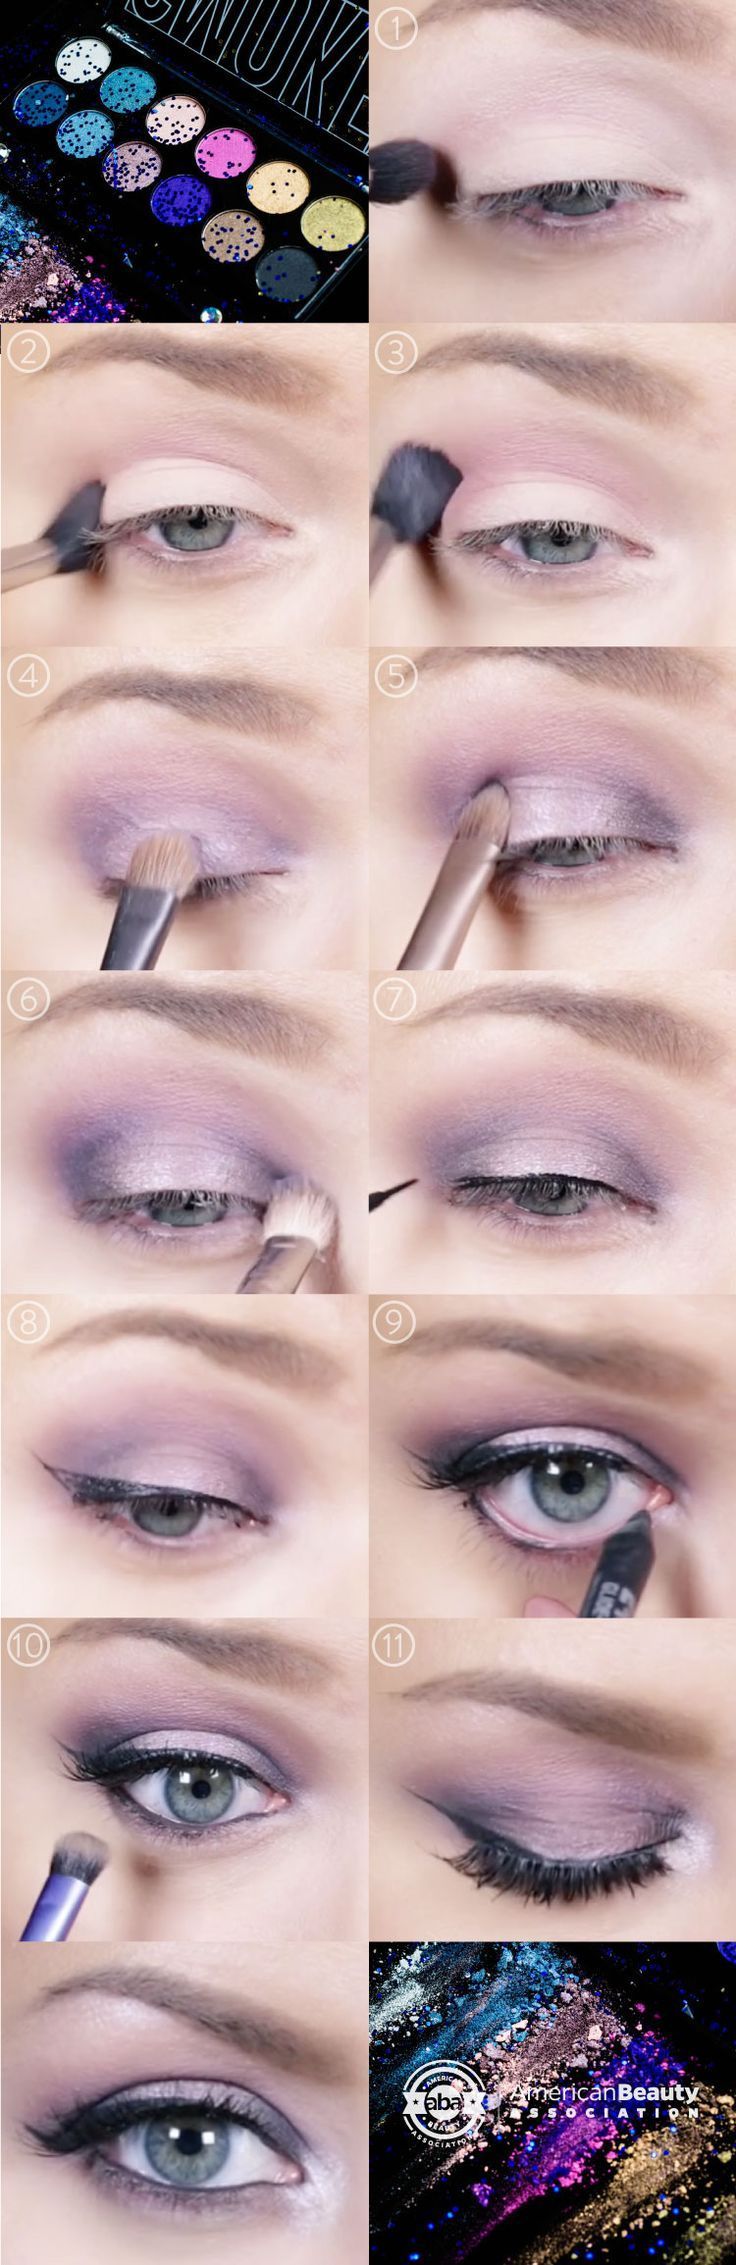 Check out our free smokey eye shadow pallet. Rich hues make for the perfect look...